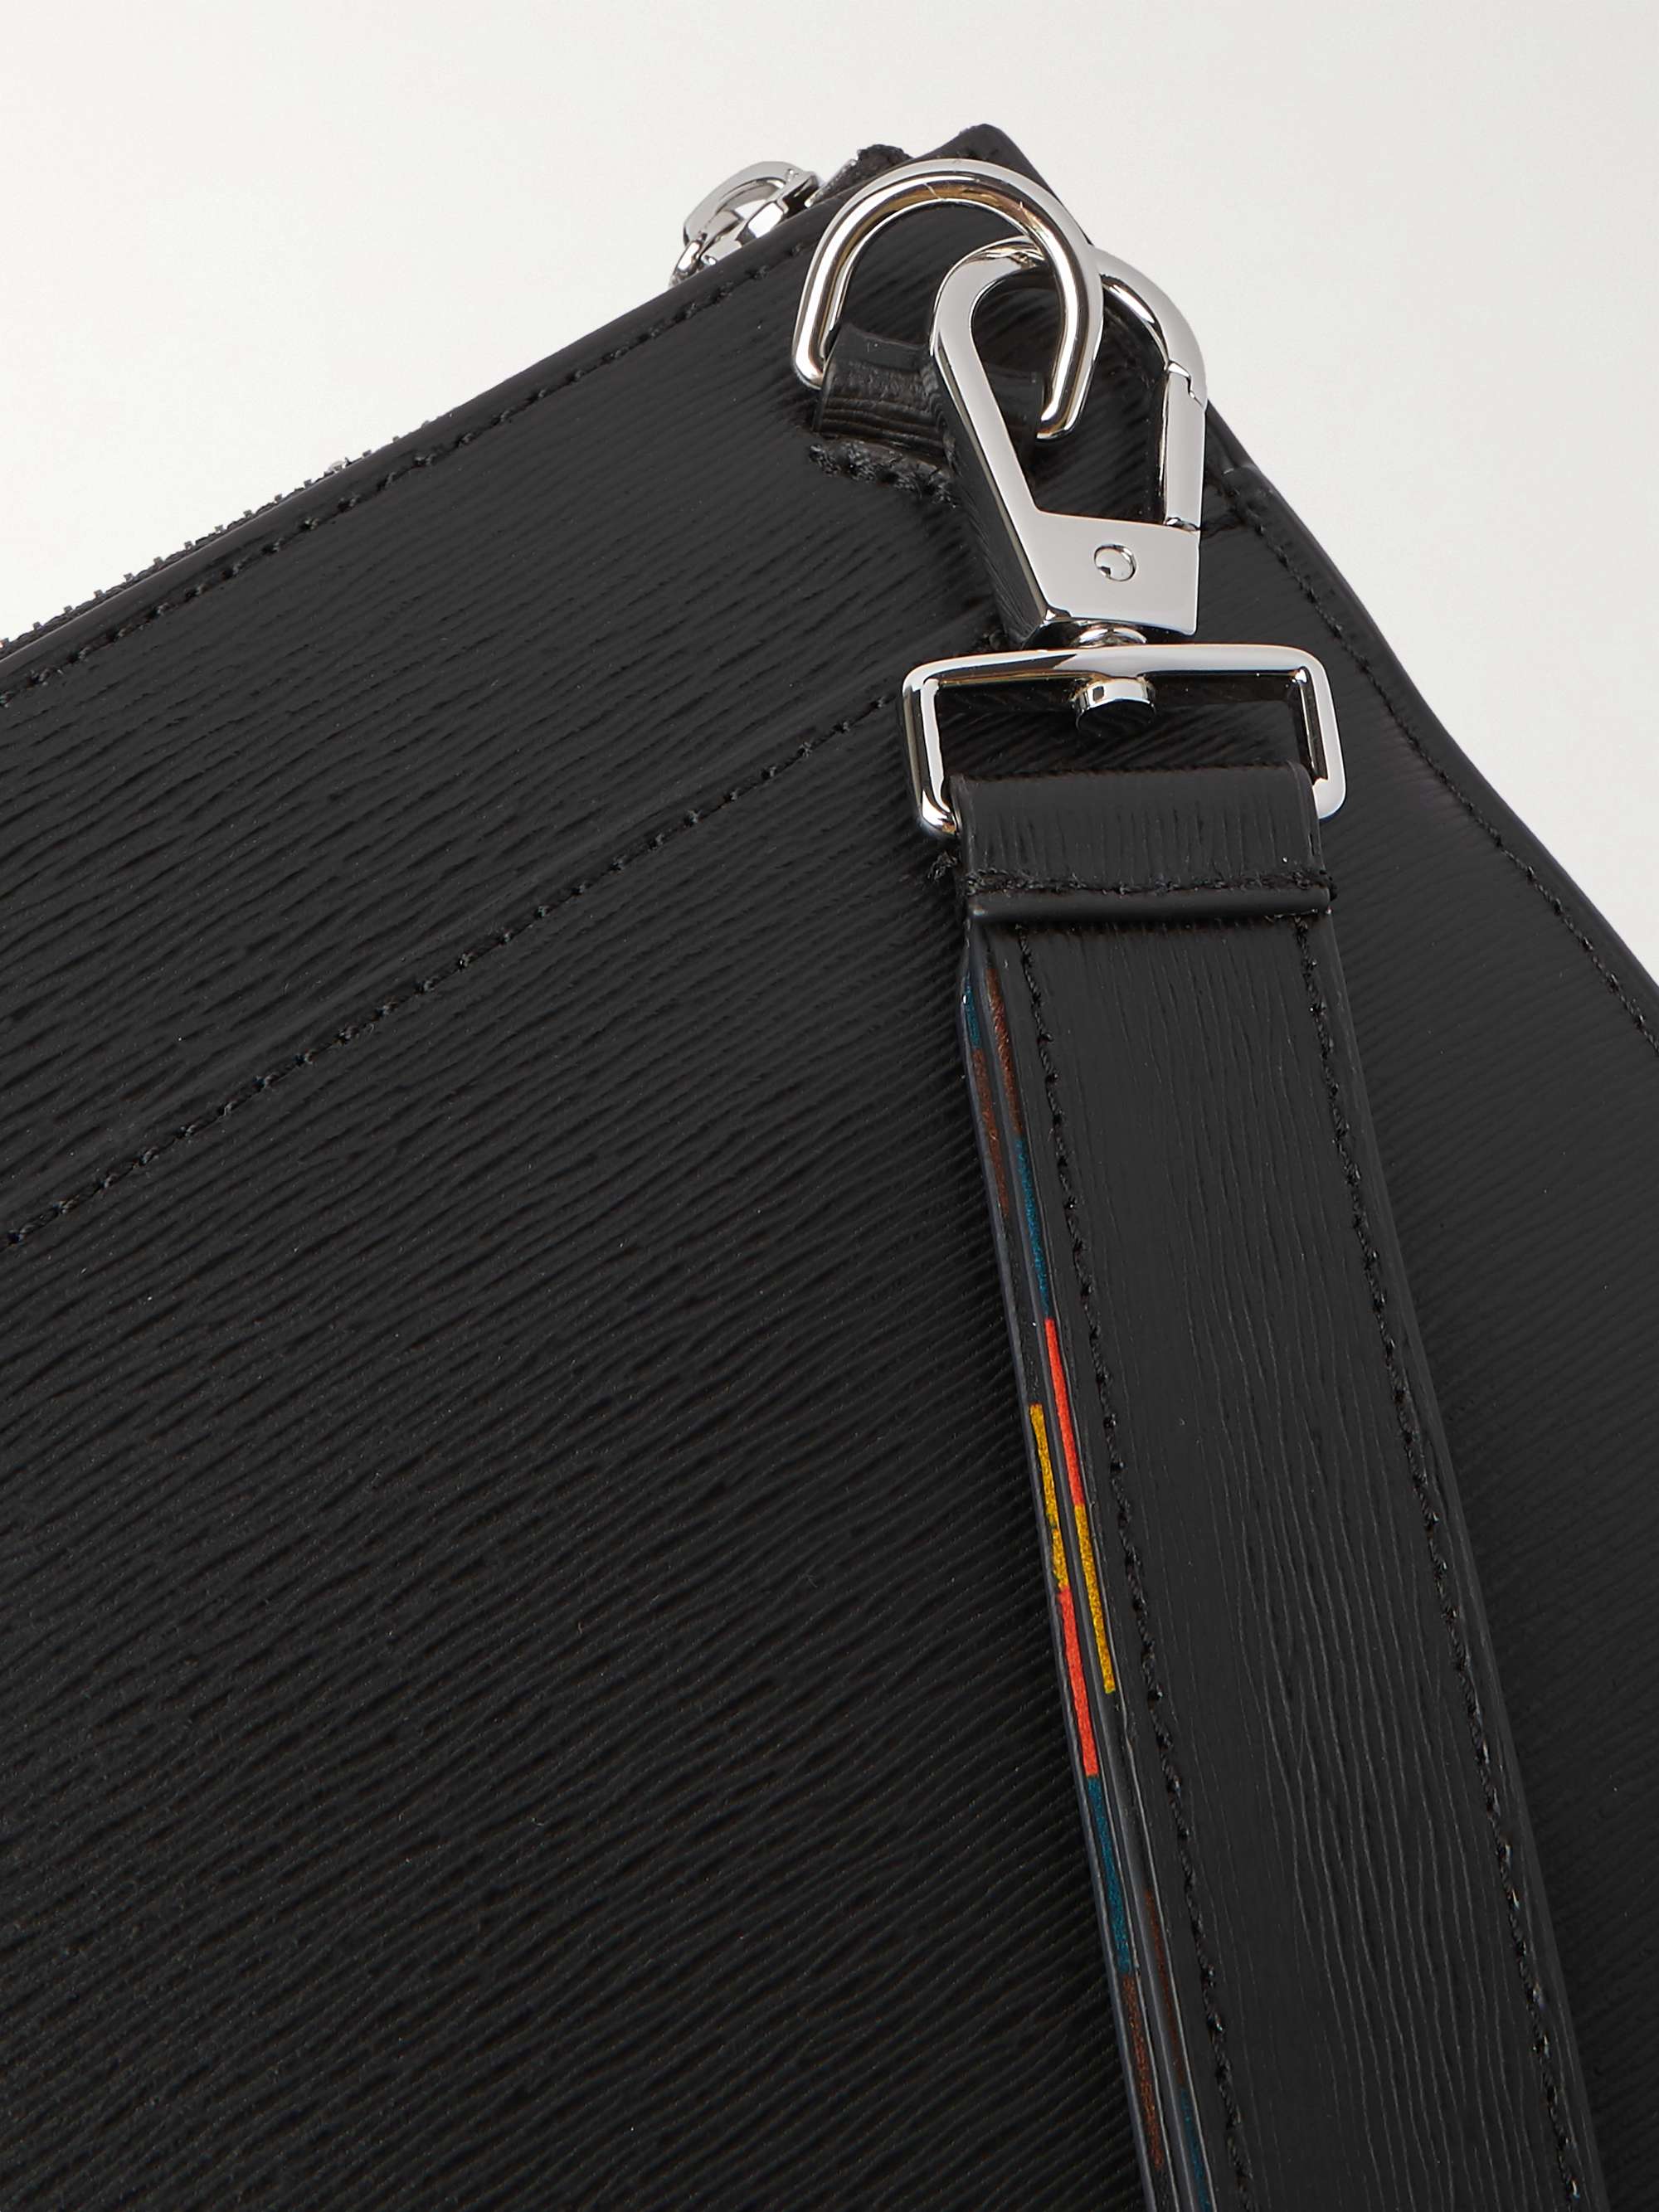 PAUL SMITH Textured-Leather Document Holder